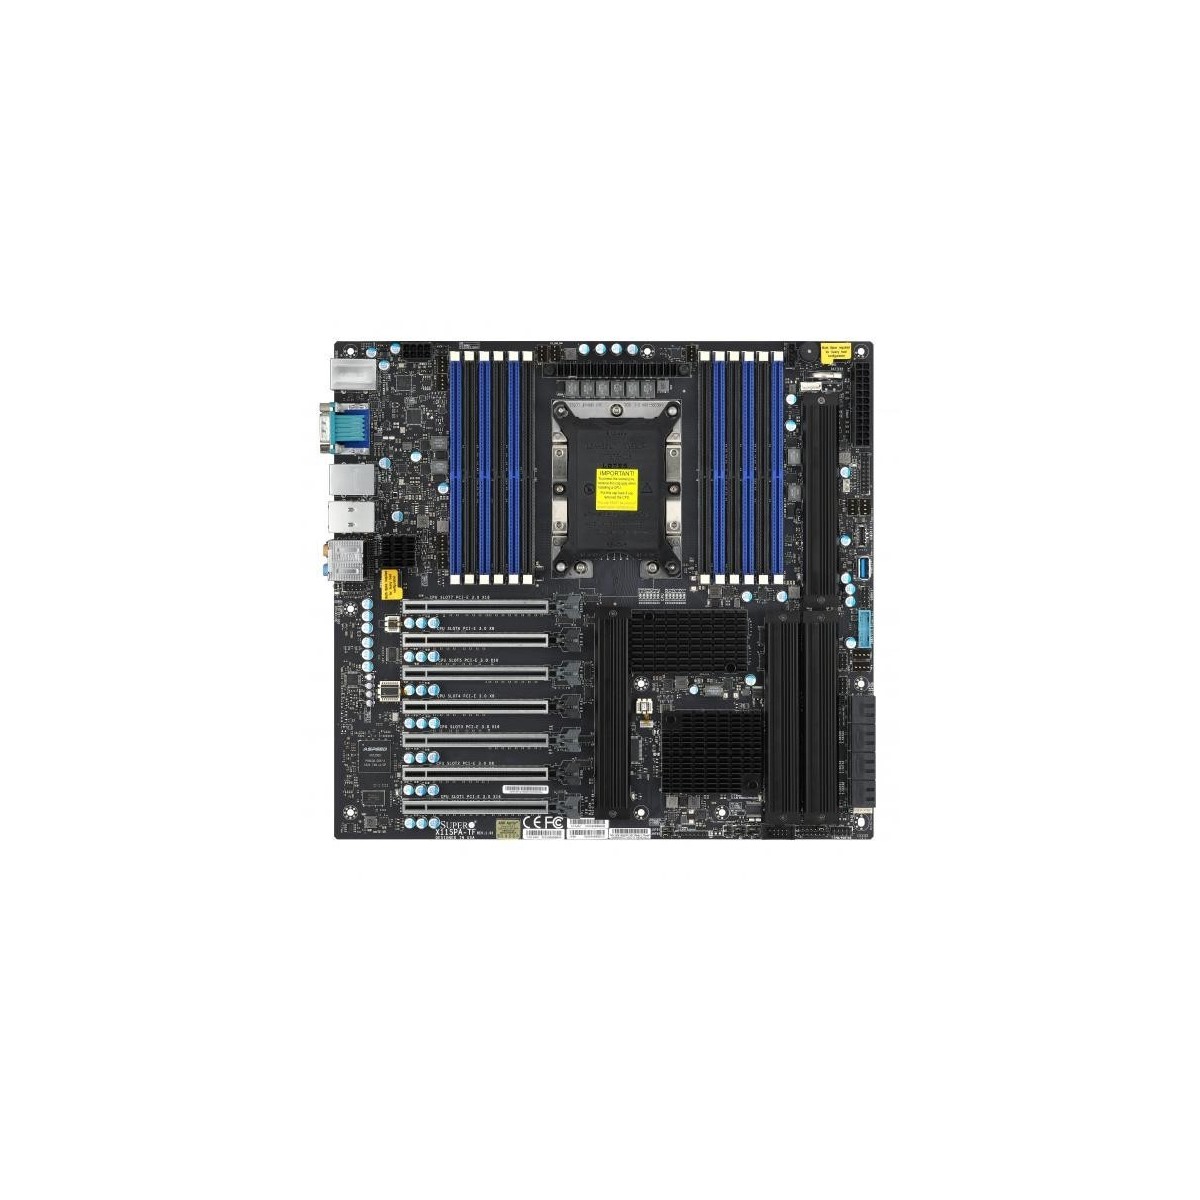 Supermicro MBD-X11SPA-TF Motherboard